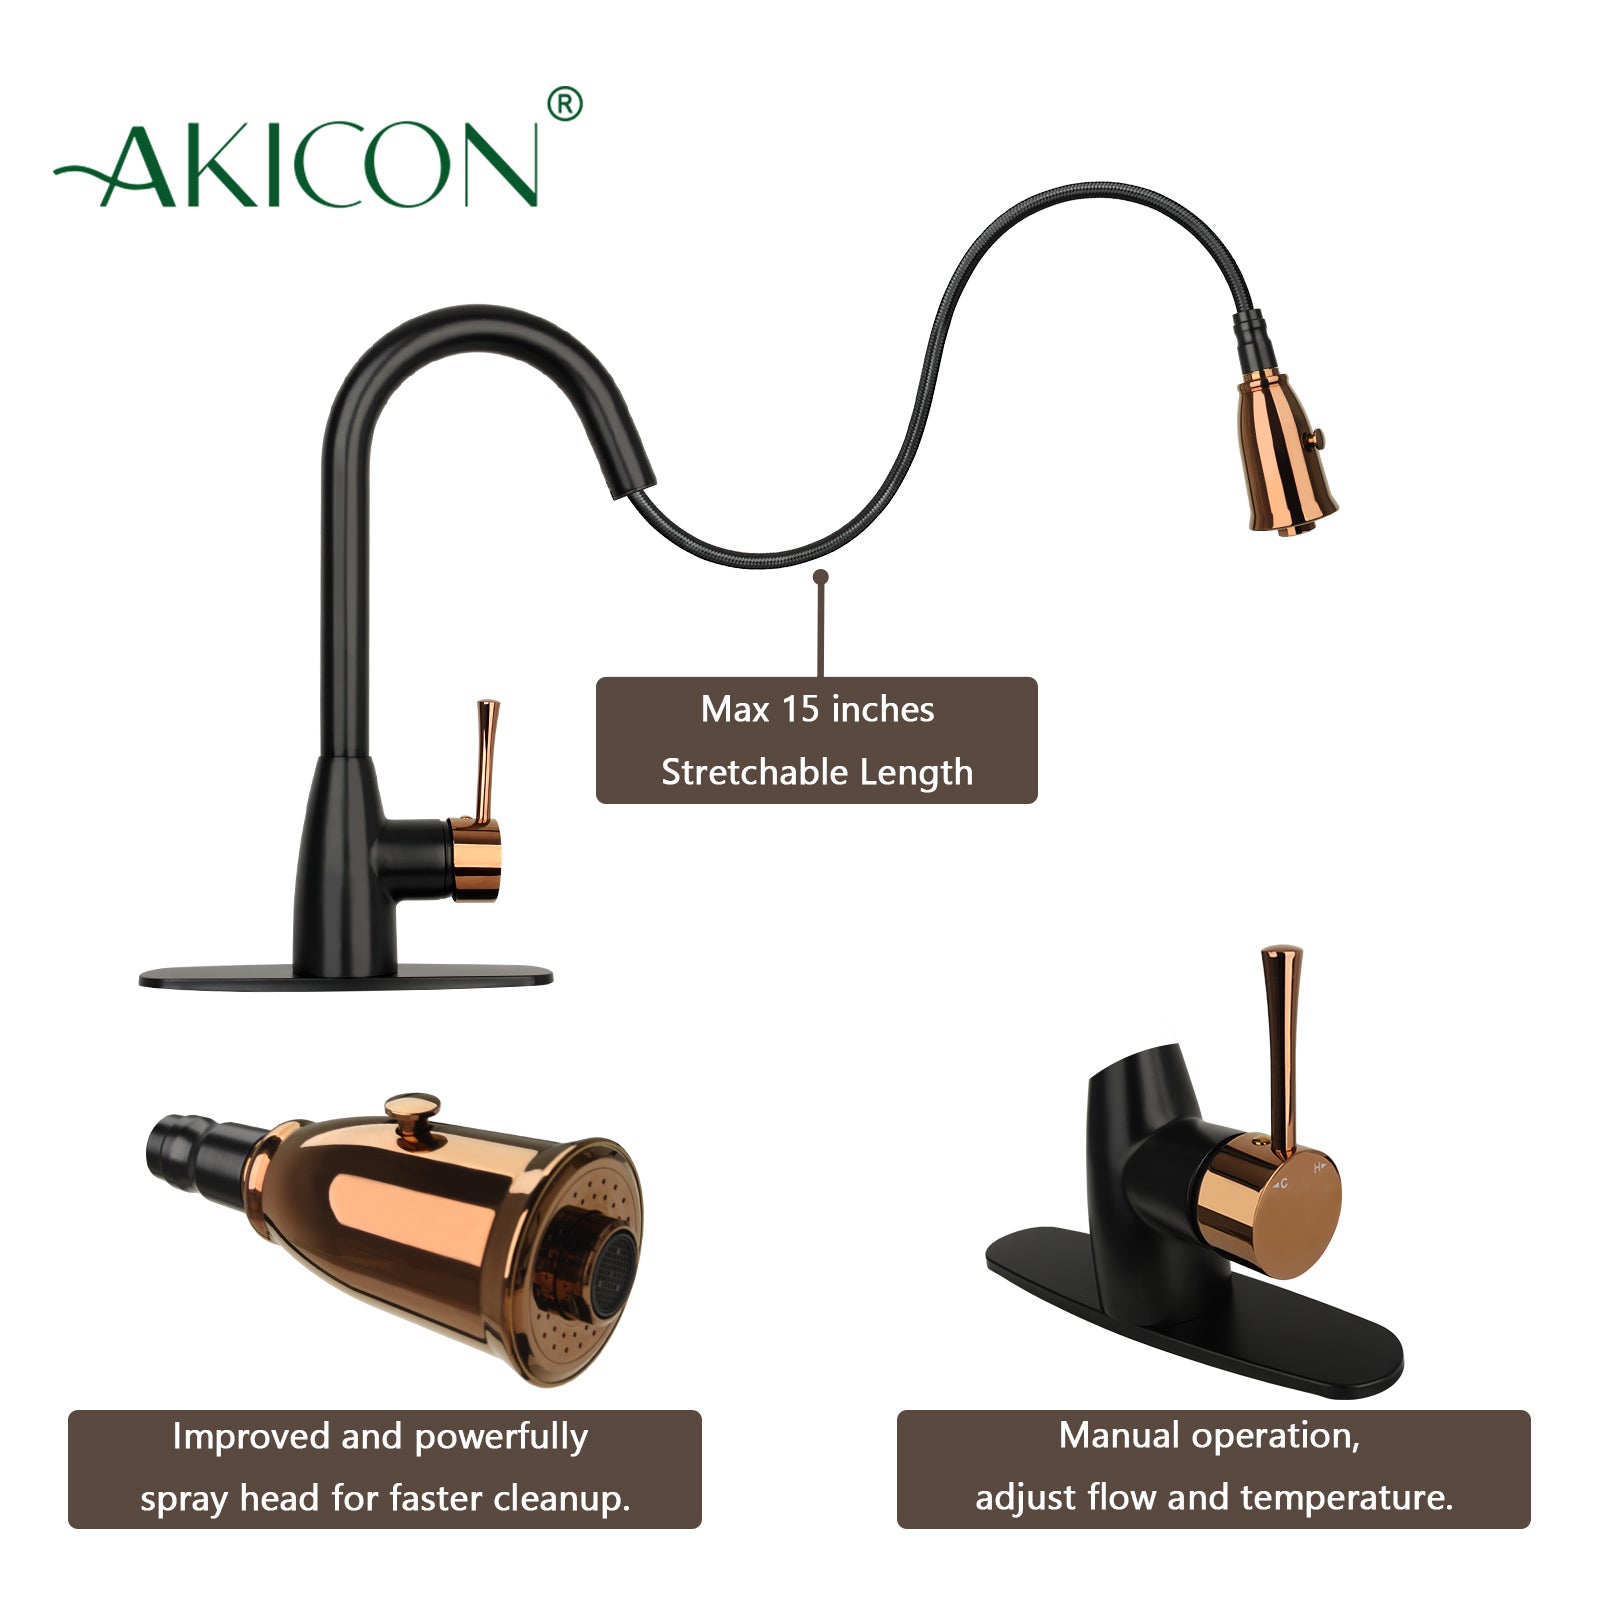 Two-Tone Matte Black & Rose Gold Pull Out Kitchen Faucet with Deck Plate, Single Level Solid Brass Kitchen Sink Faucets with Pull Down Sprayer - AK455BLRG